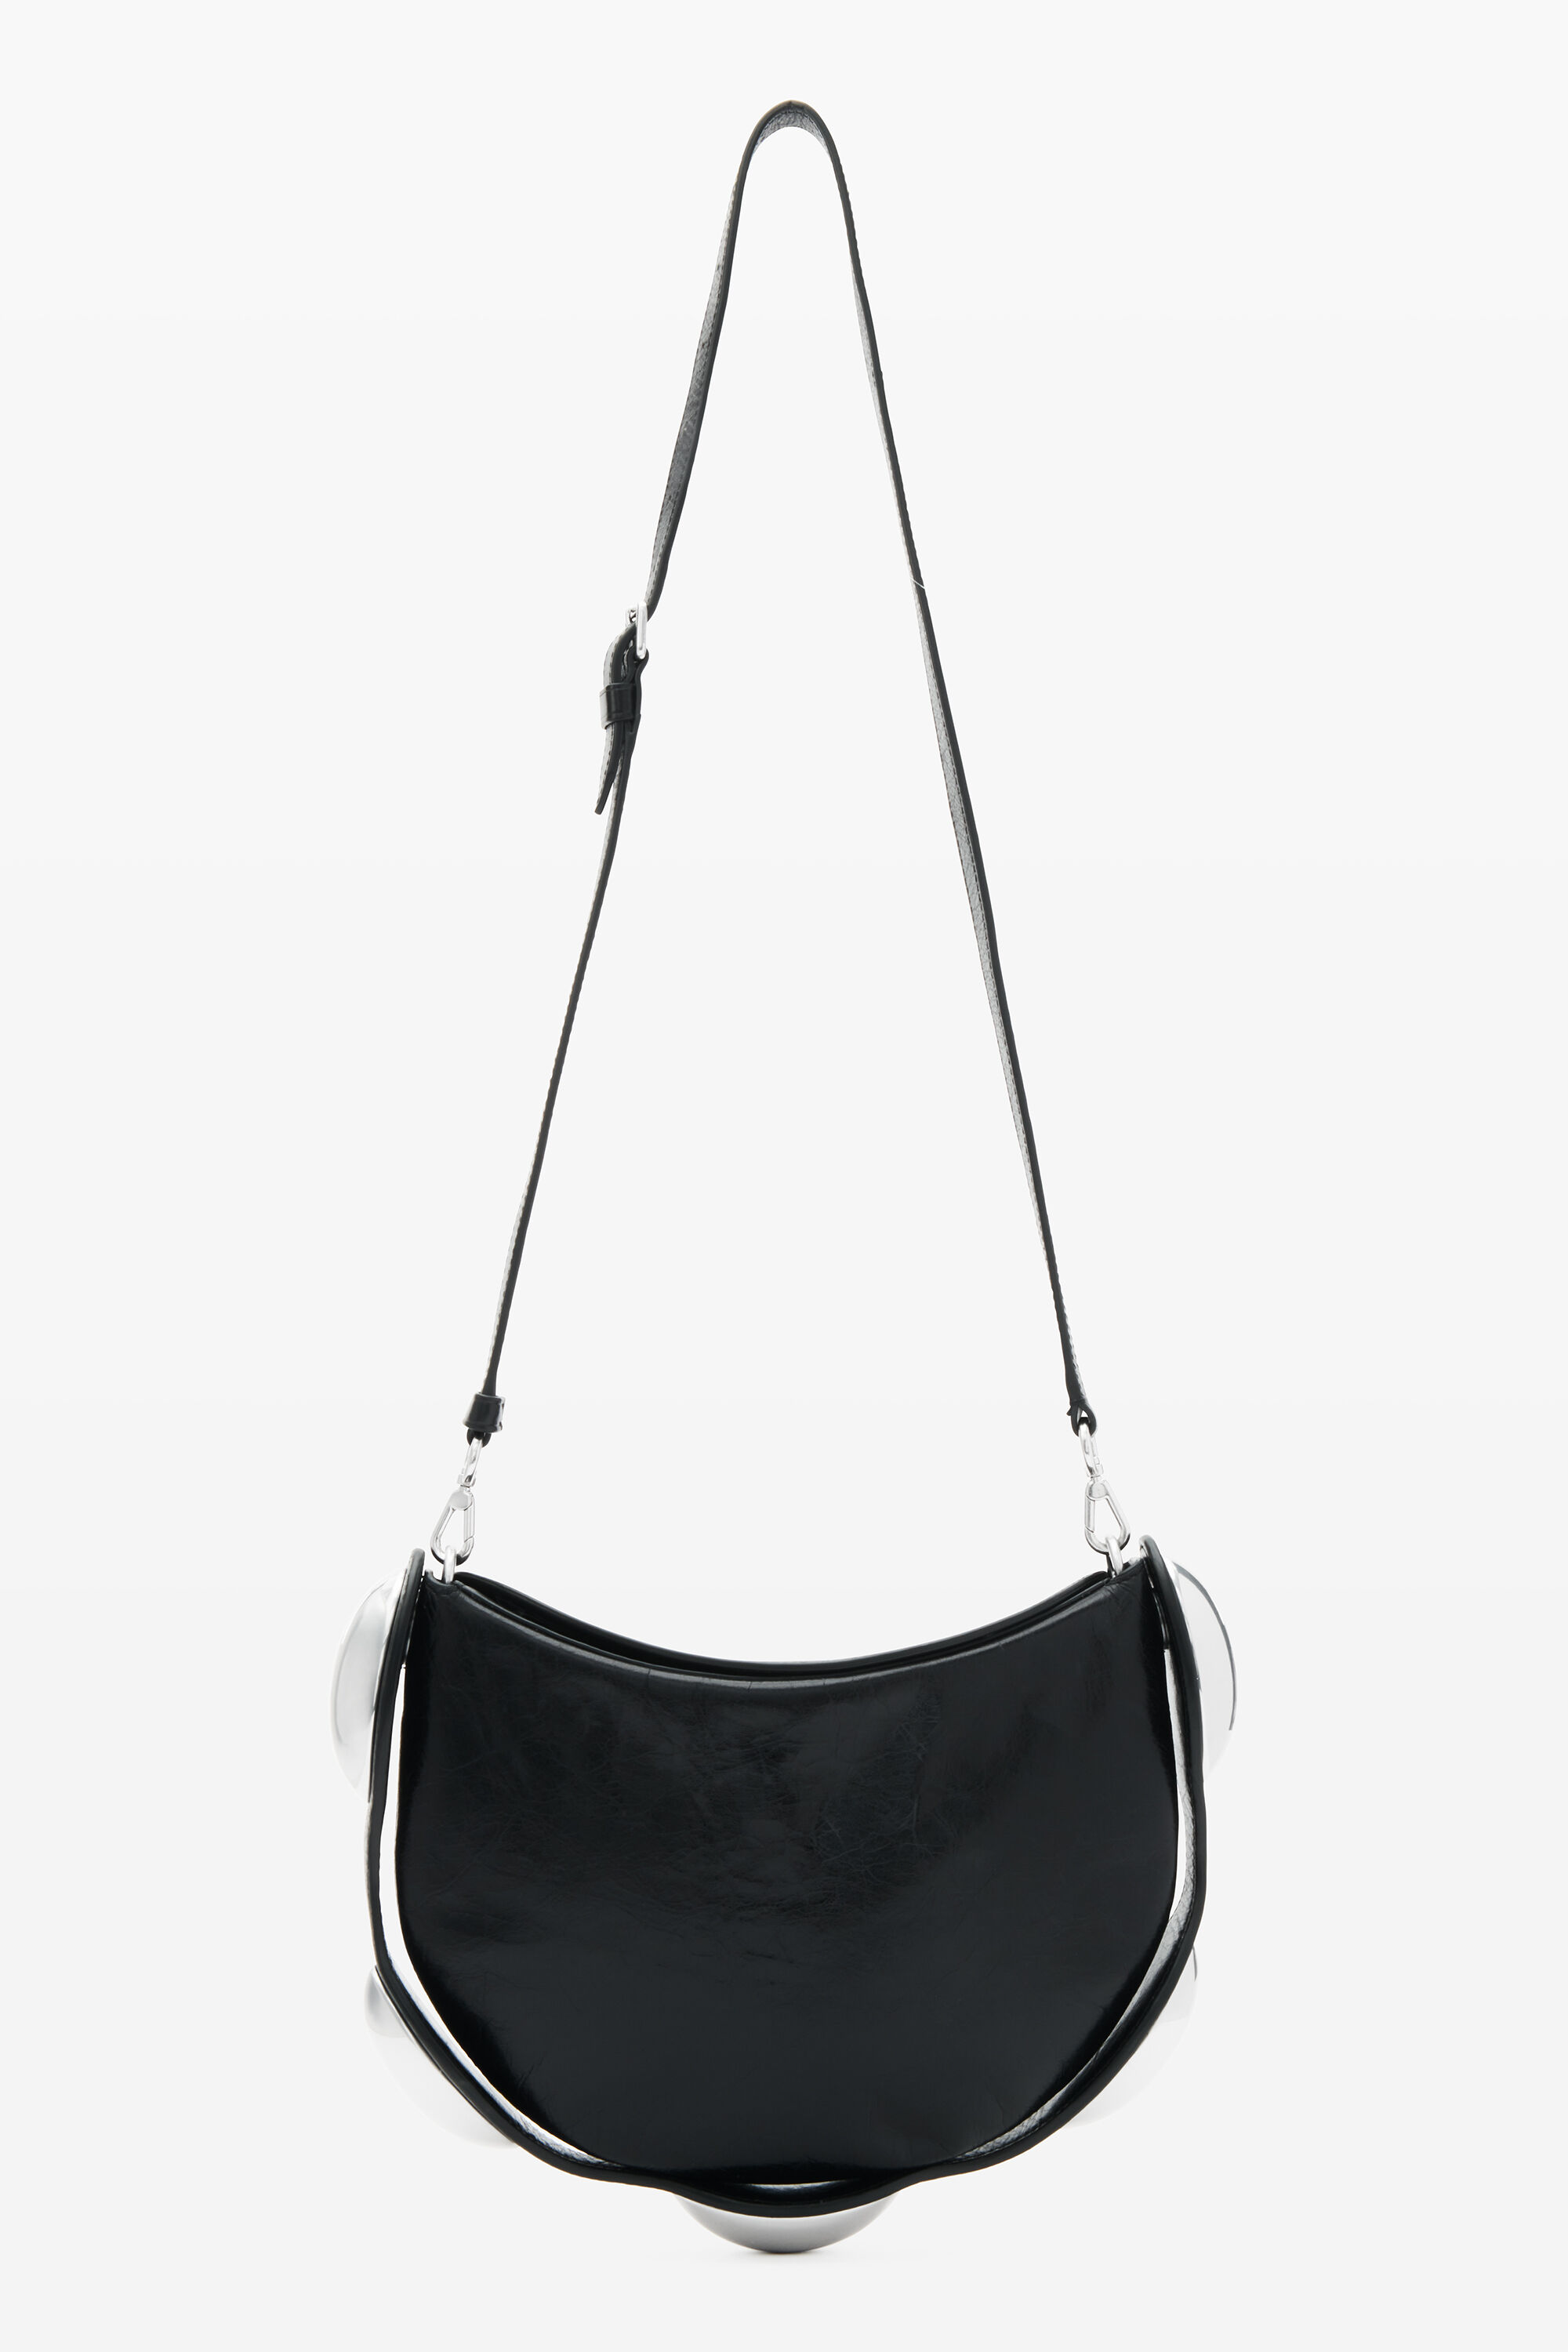 alexanderwang dome multi carry bag in crackle patent leather BLACK 